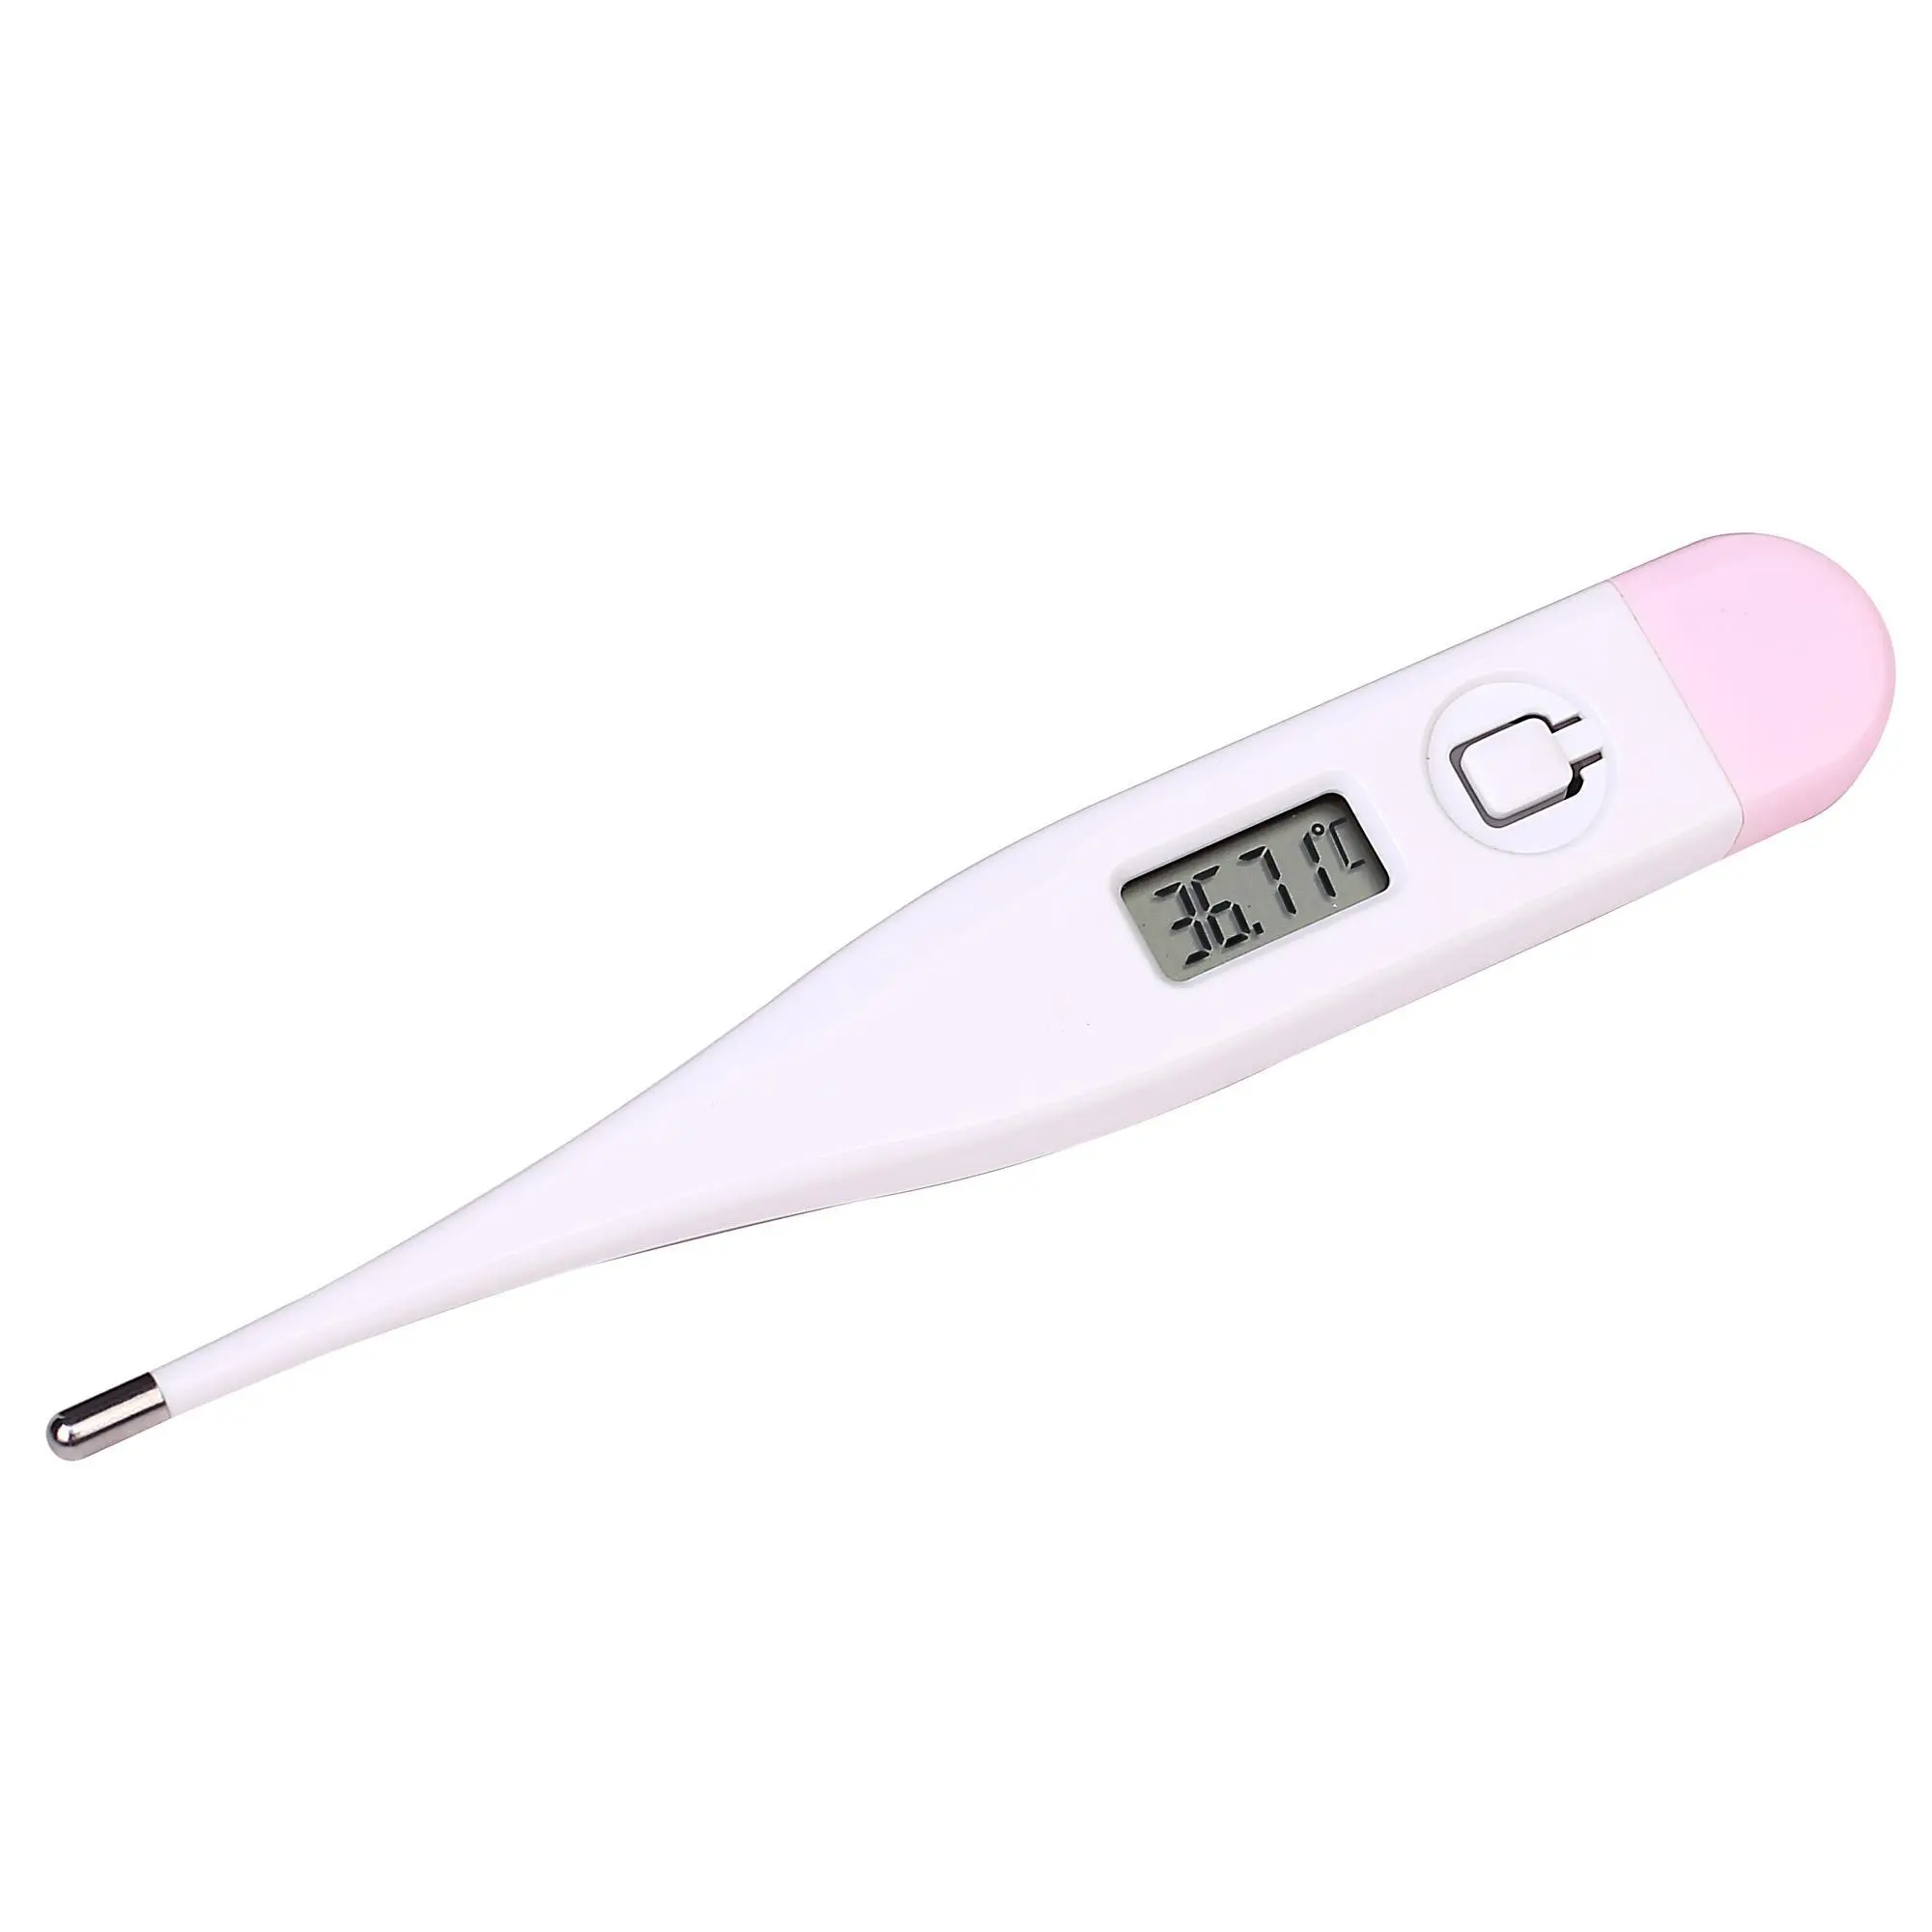 Digital Body Thermometer Supplier